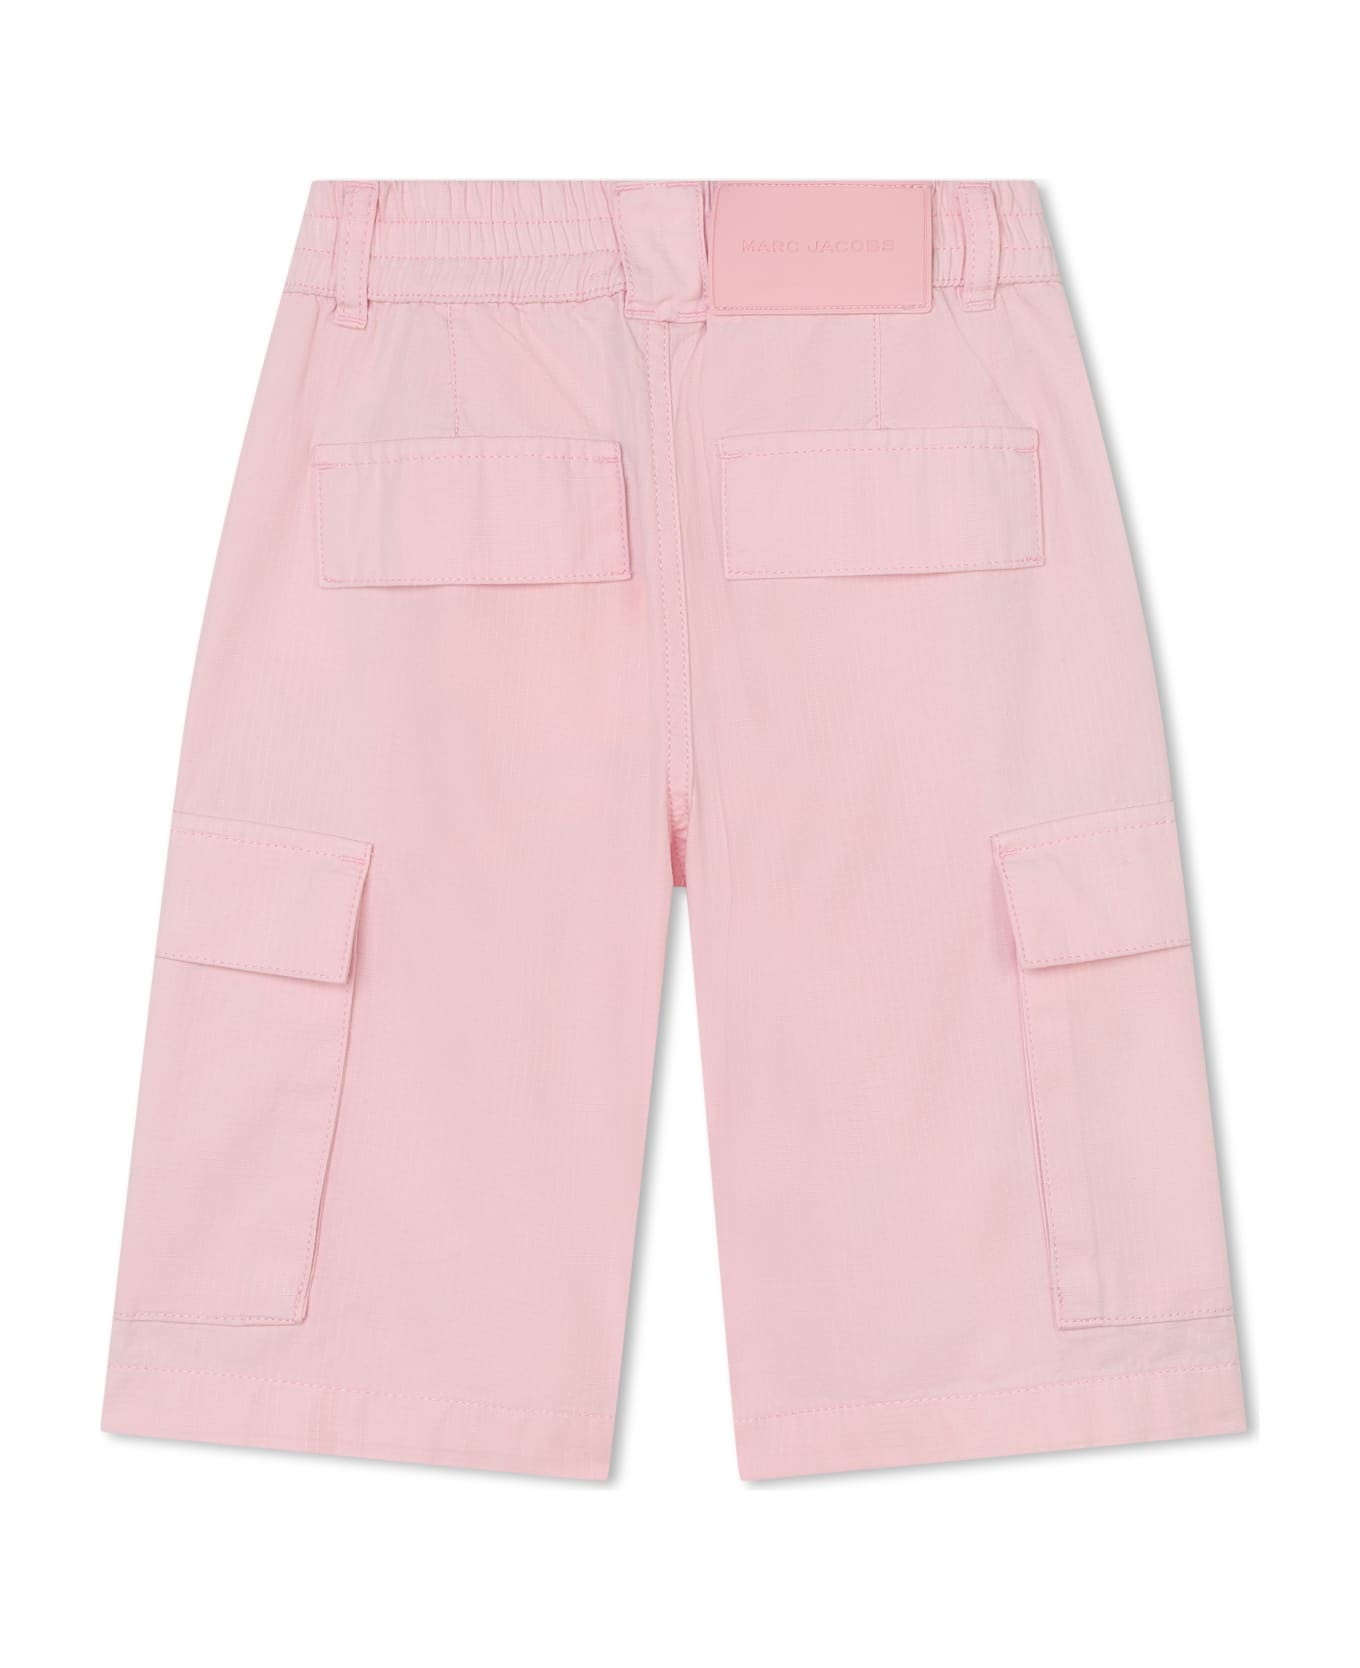 Marc Jacobs Bermuda Cargo - Pink ボトムス